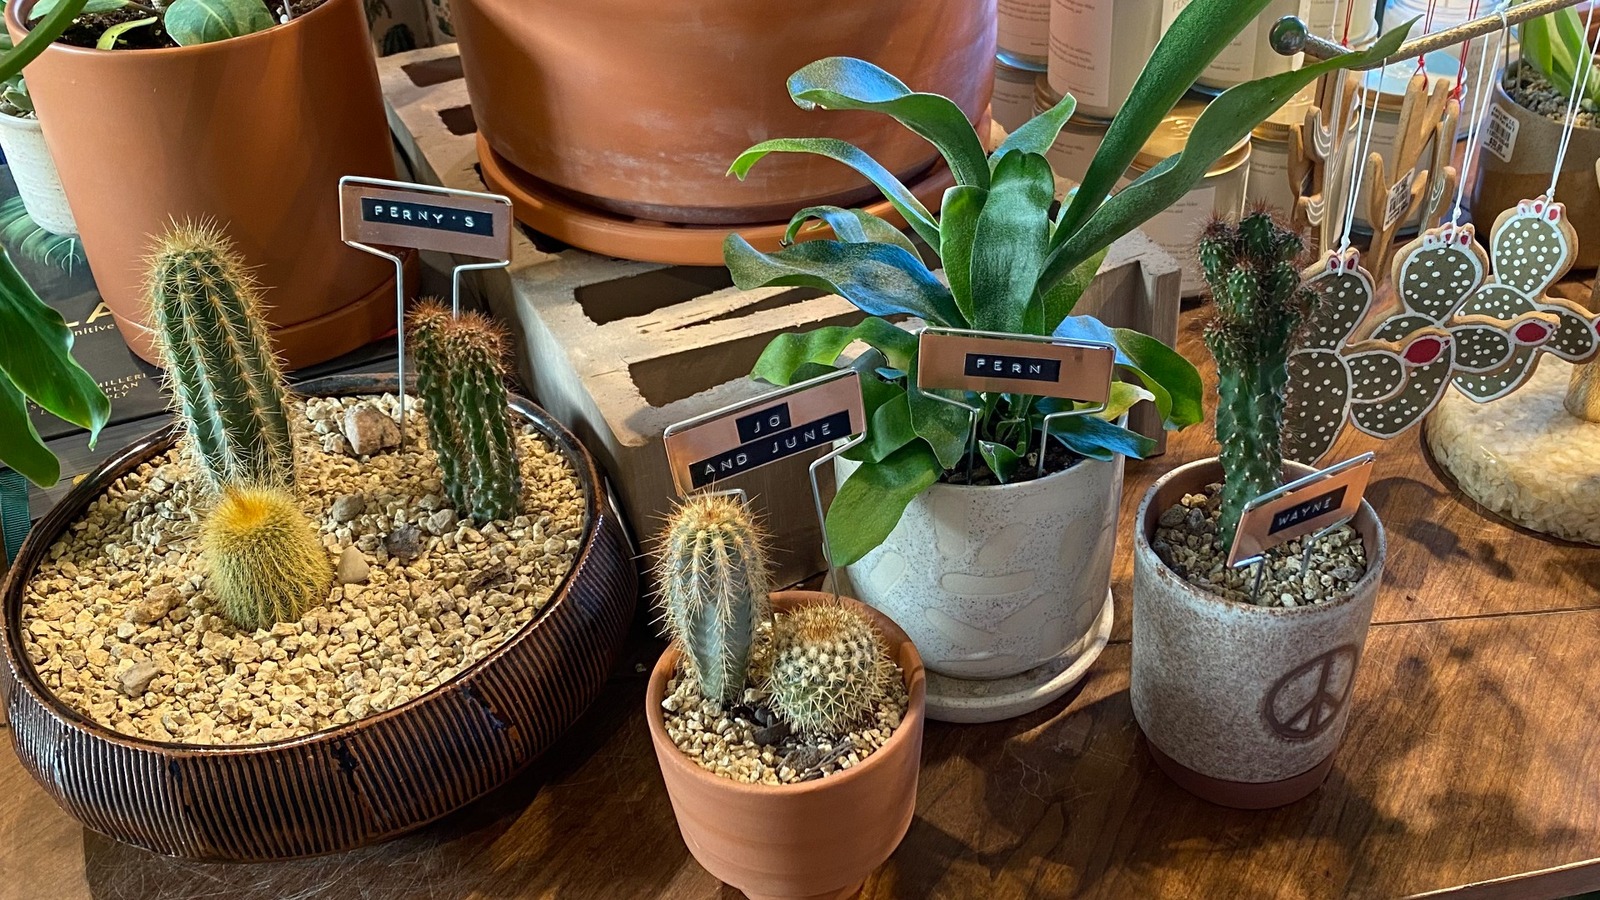 https://www.housedigest.com/img/gallery/fernys-at-magnolia-tells-us-how-to-create-drainage-in-houseplant-pots-with-zero-drilling/l-intro-1698267399.jpg